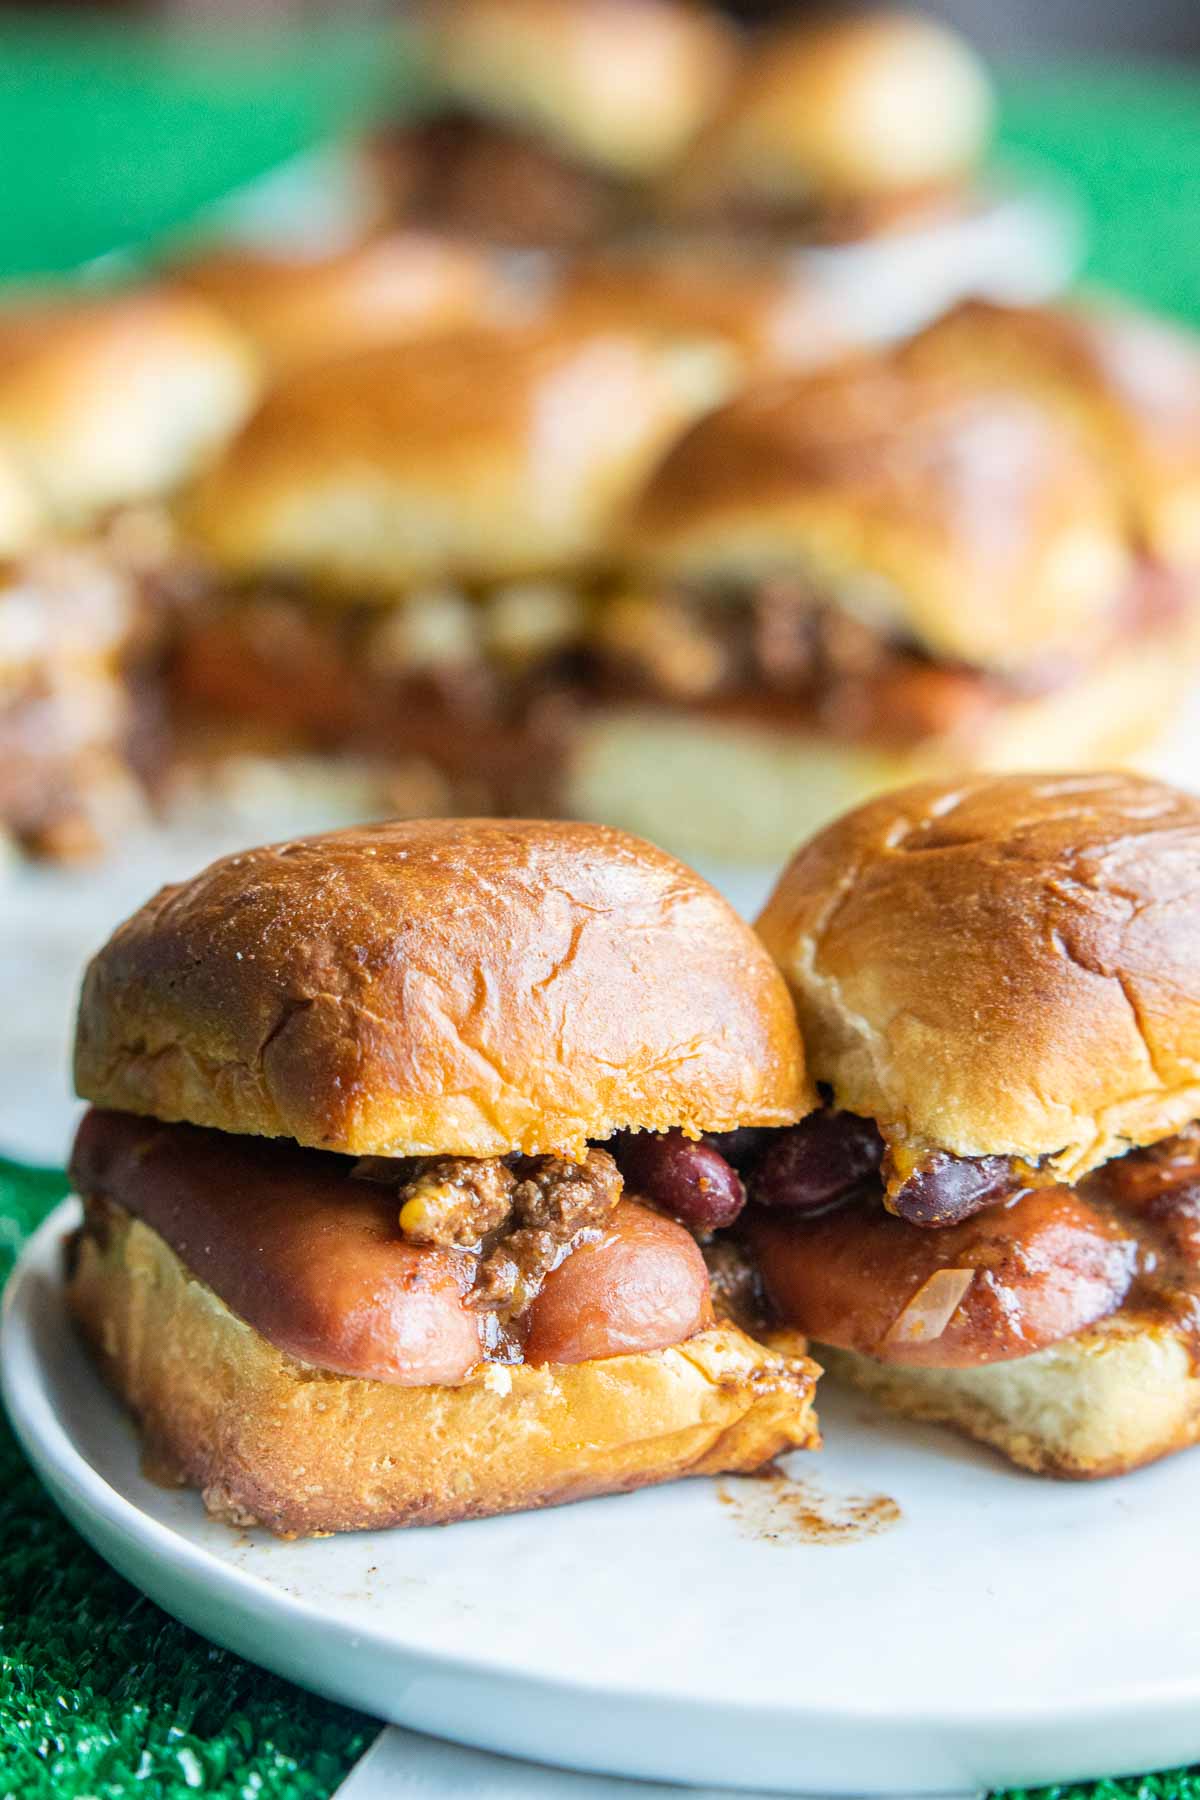 Chili Dog Sliders on a plate